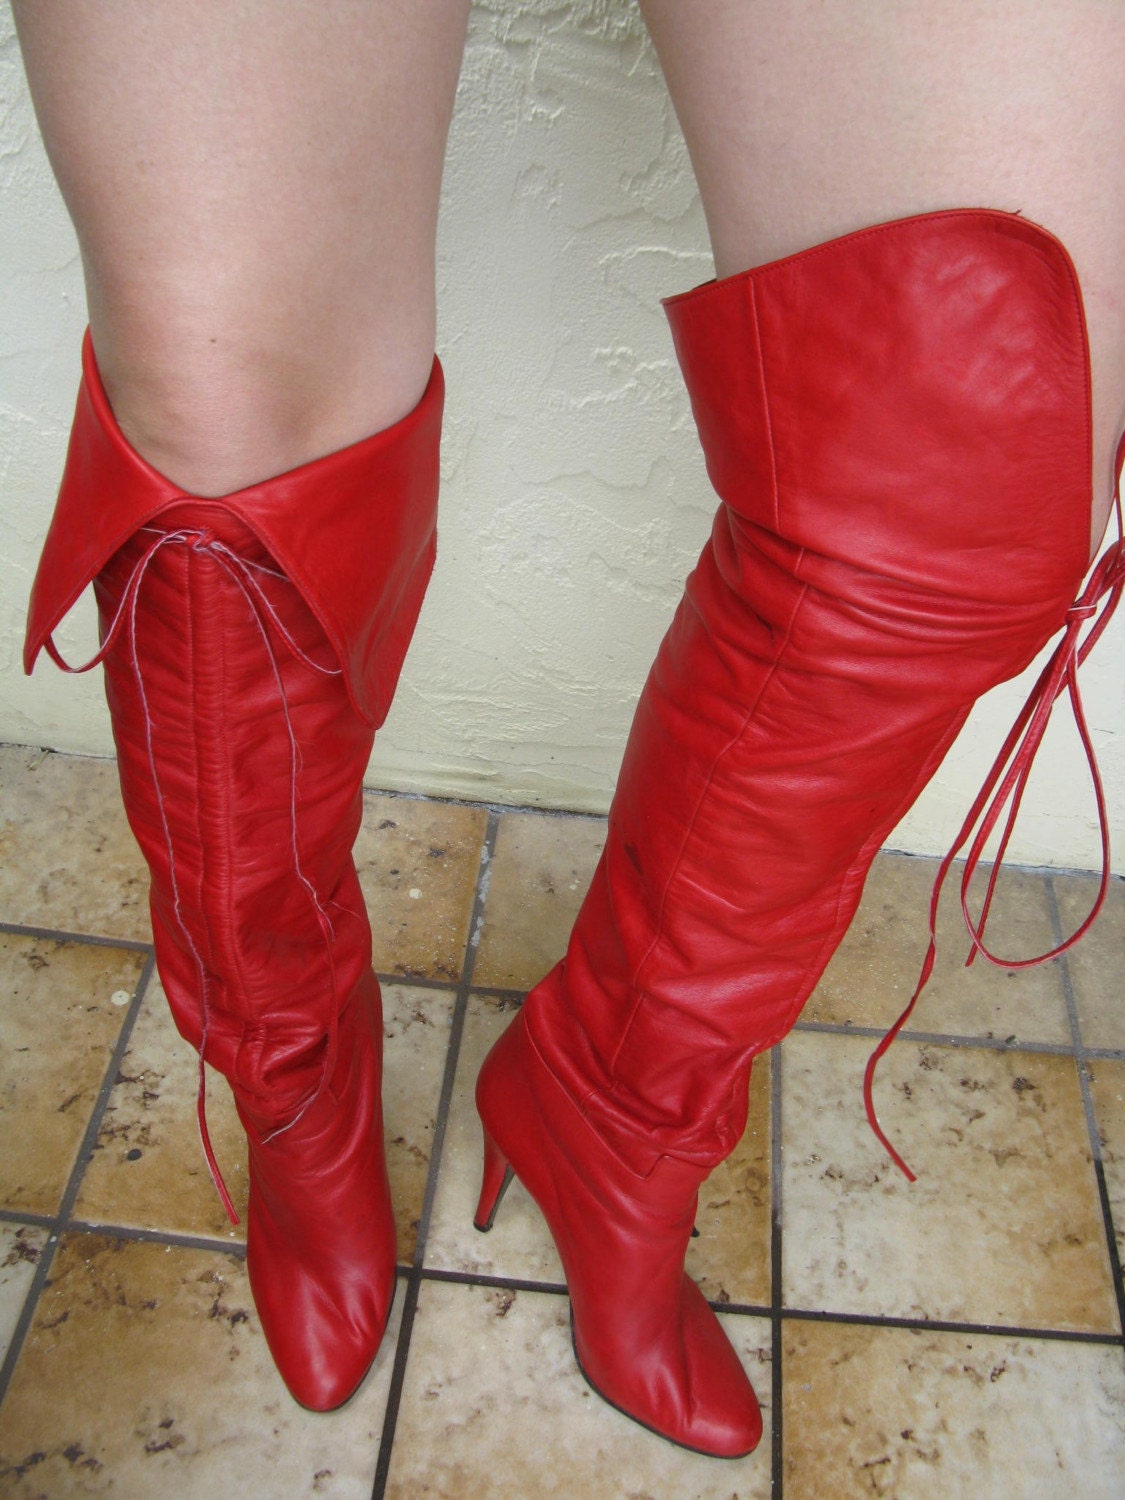 Sex On Heels Vintage 80 S Mary Popps Supple Red Leather